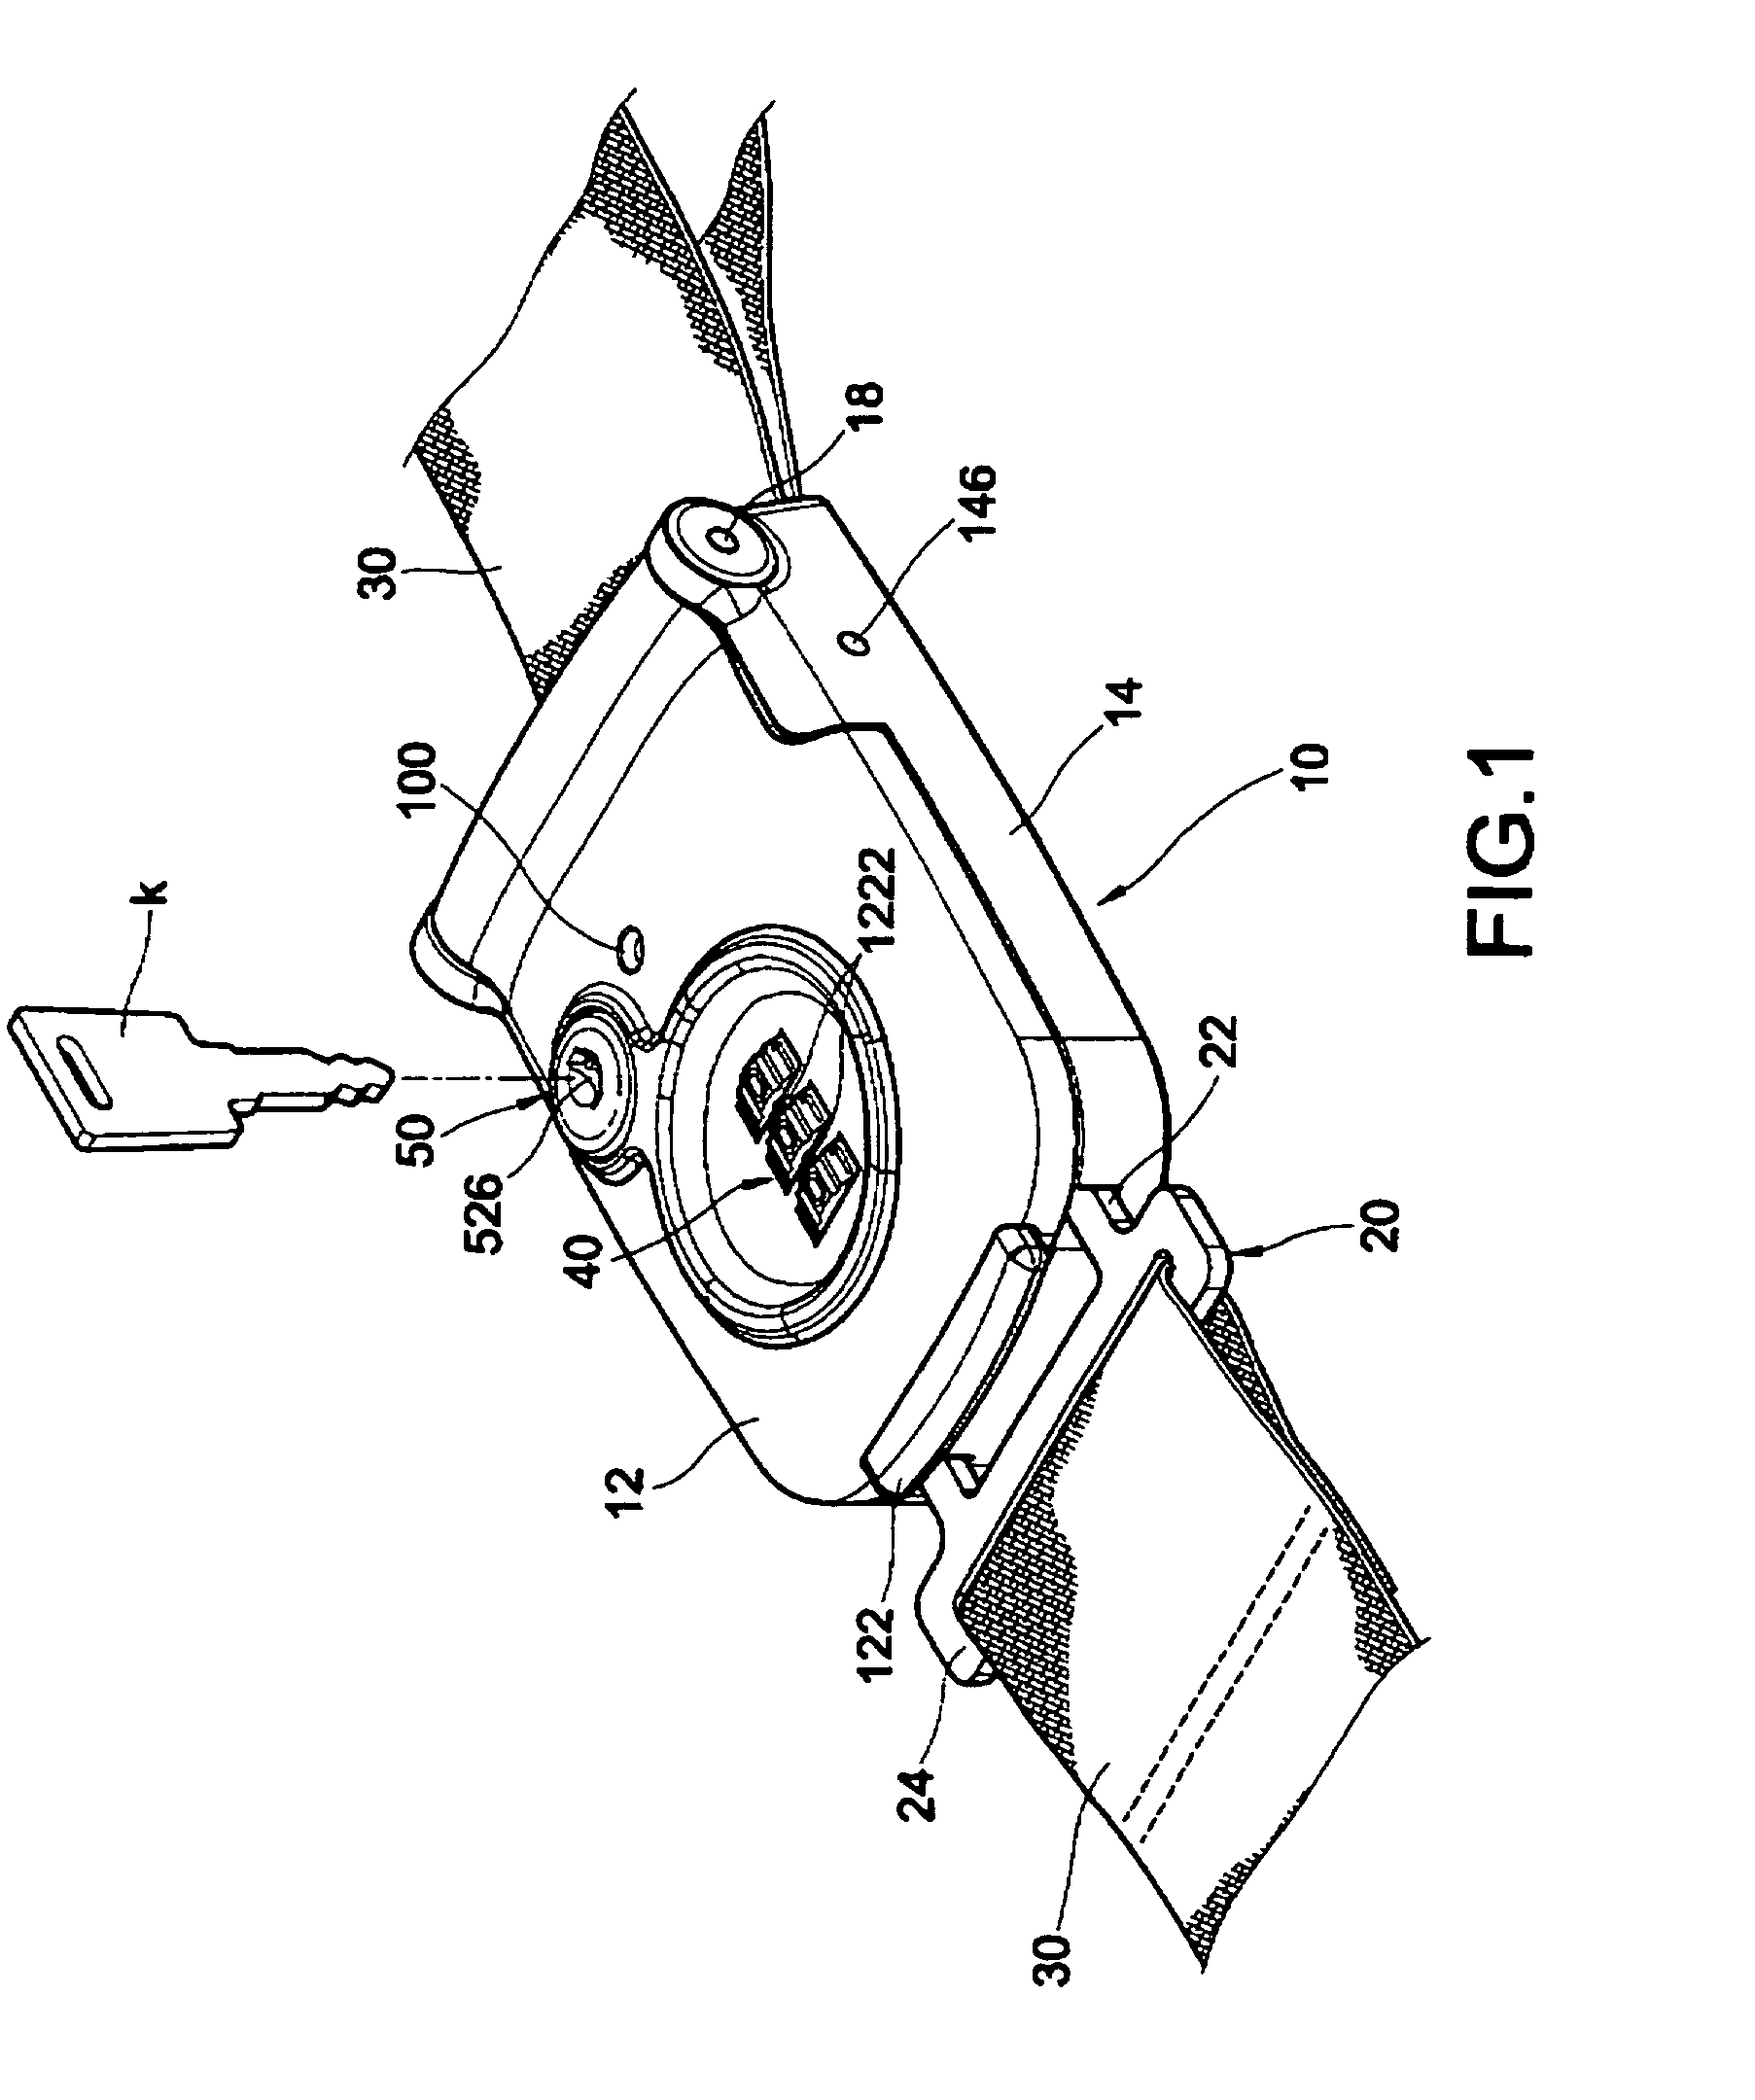 Strap lock with both functions of combination code setting and key operation